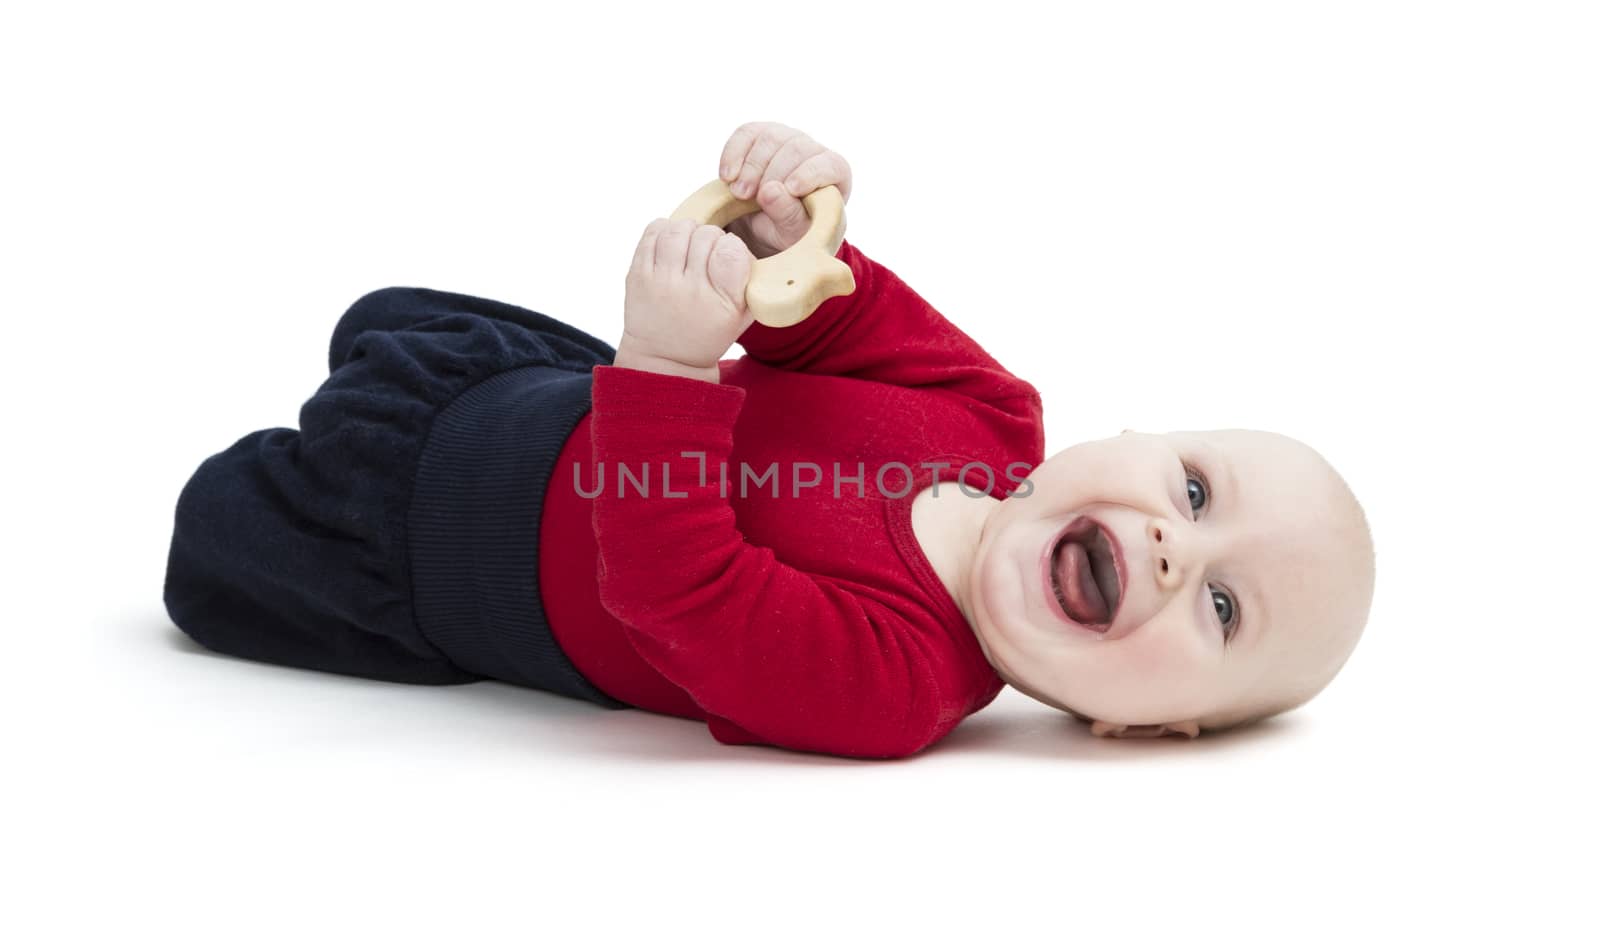 laughing baby in red shirt on floor. isolated on white background